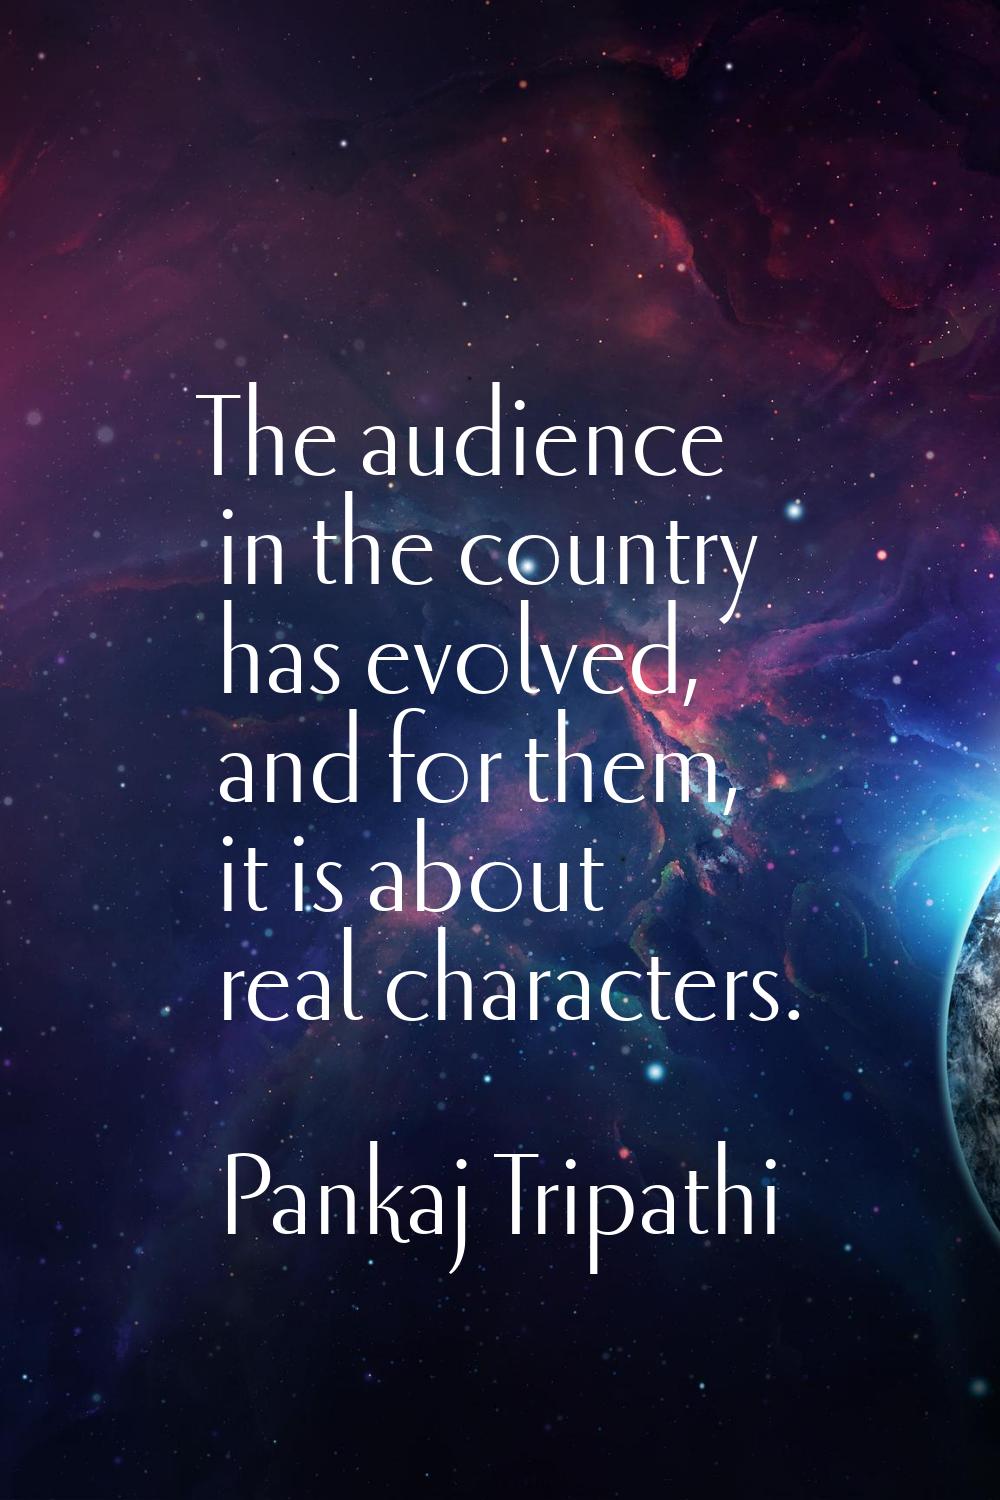 The audience in the country has evolved, and for them, it is about real characters.